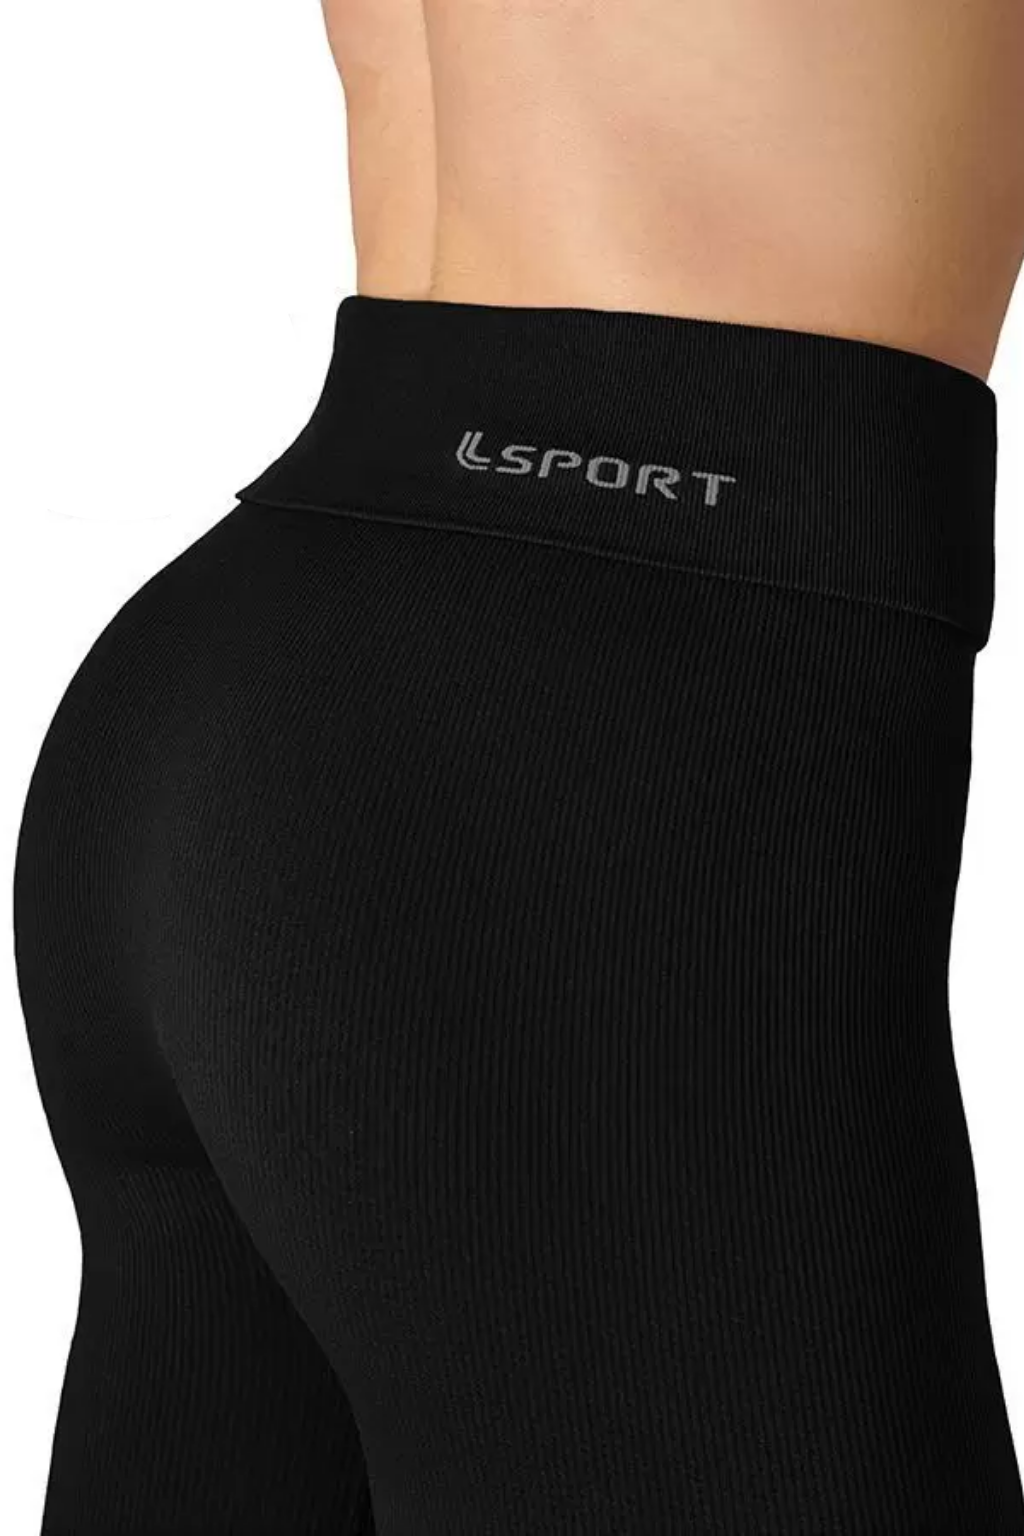 Lupo New Strong Ribbed Sport Legging Fitness Pants